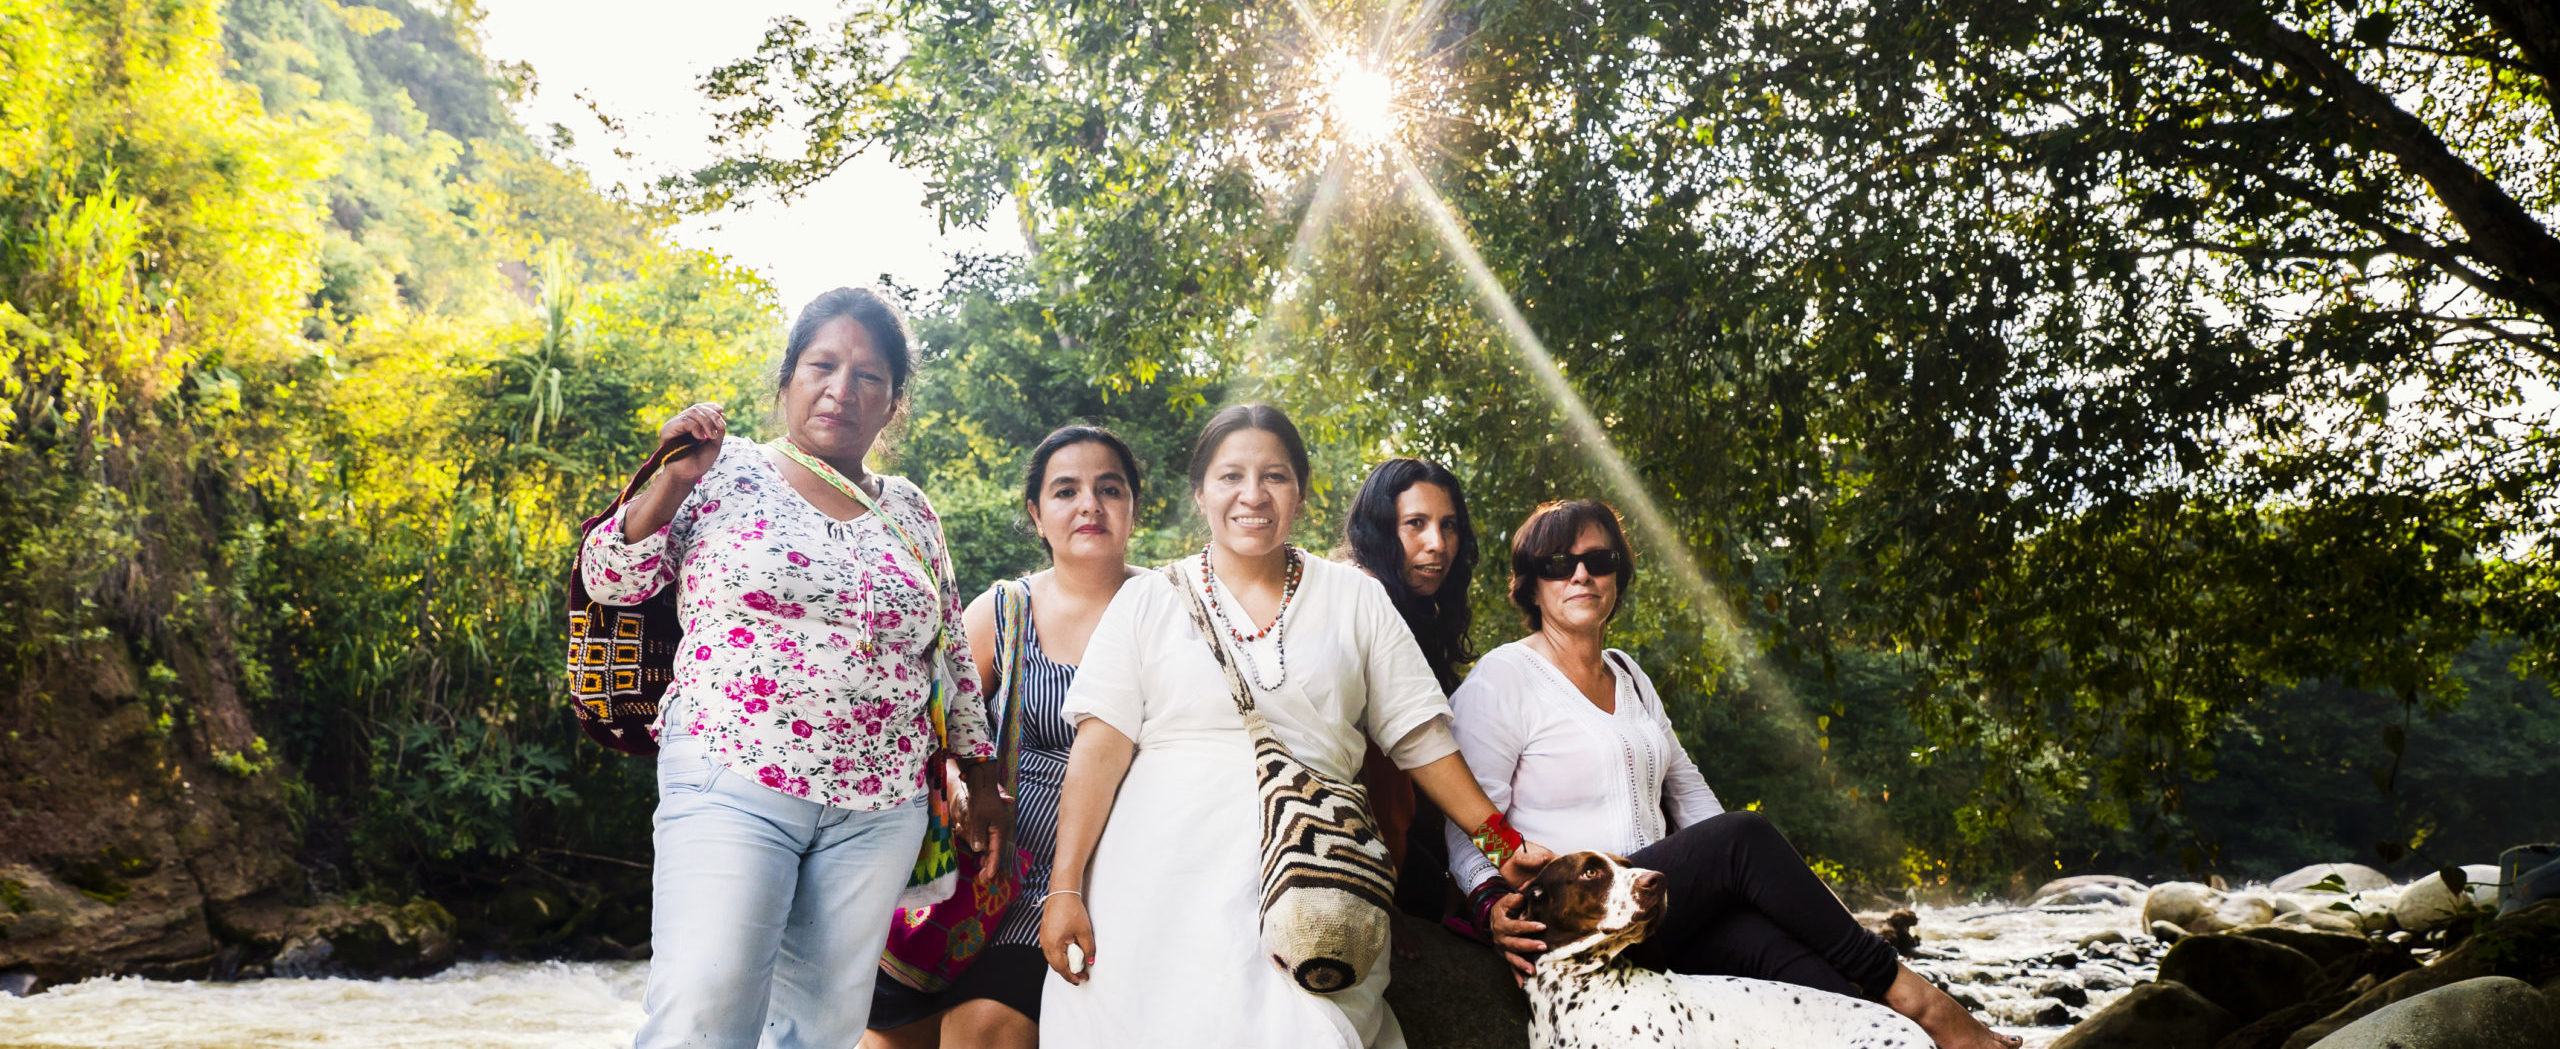 Colombian Women & the Path to Peace - KAIROS Canada